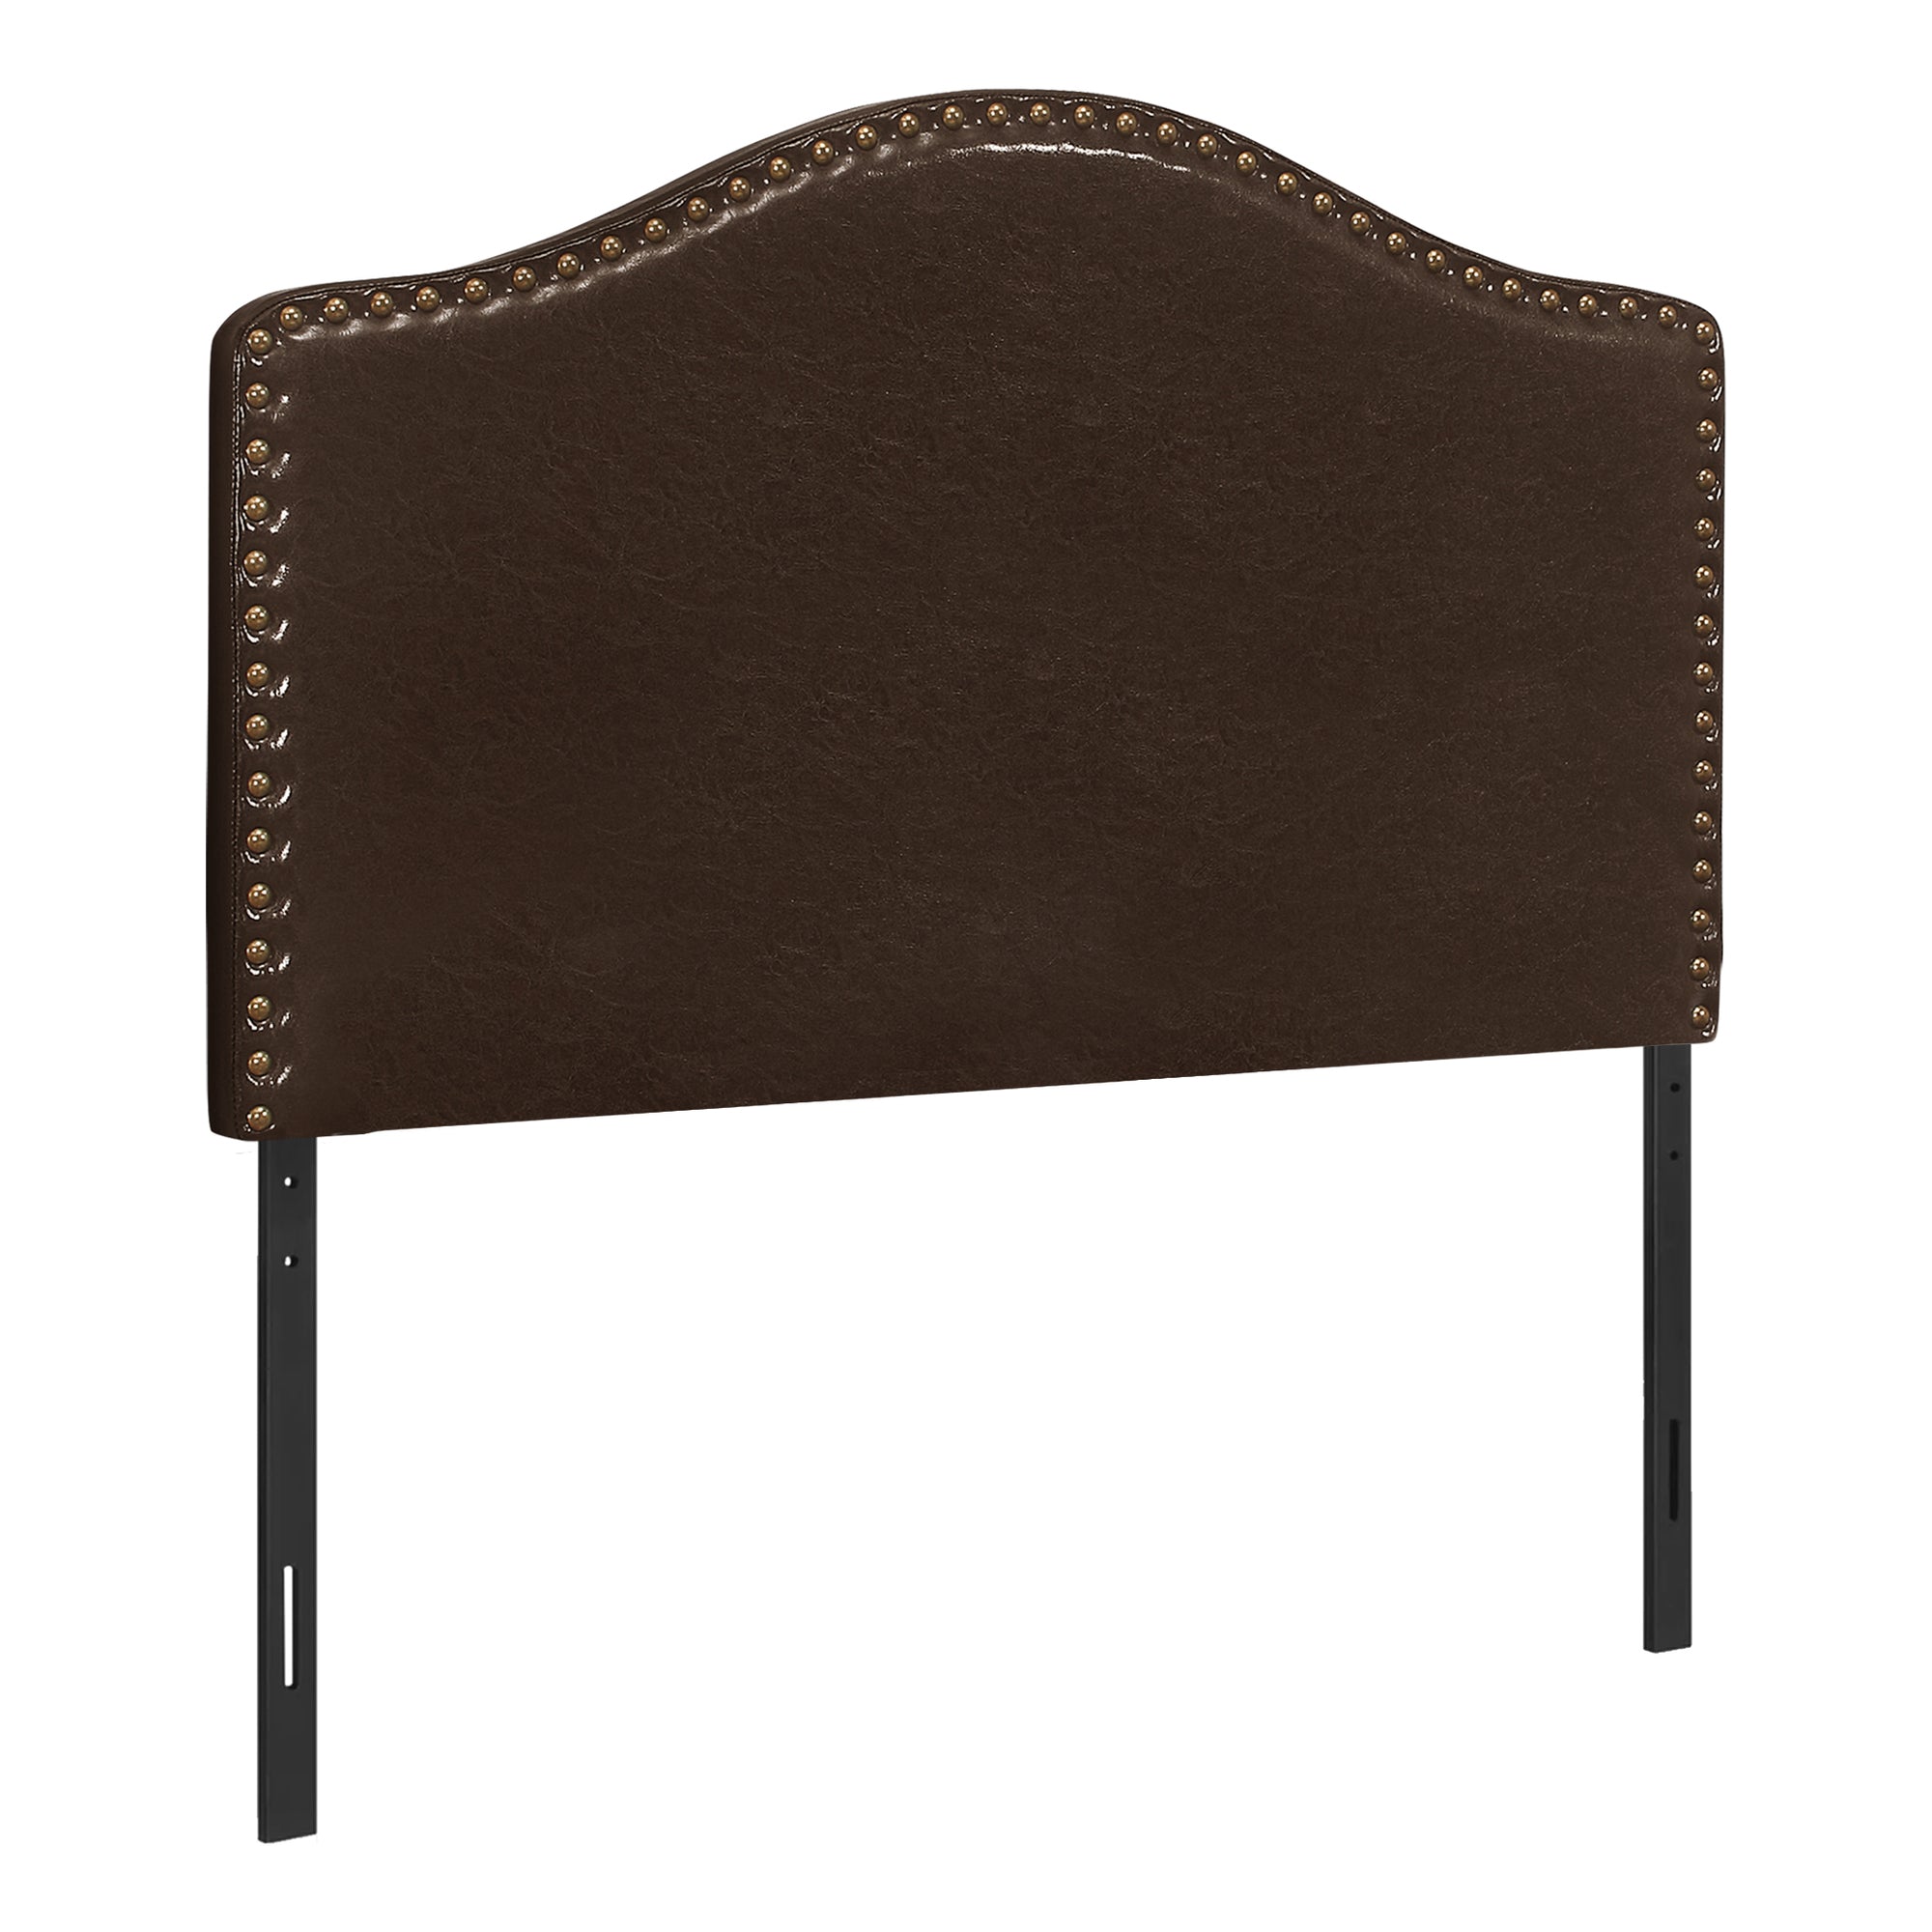 Bed - Twin Size / Brown Leather-Look Headboard Only